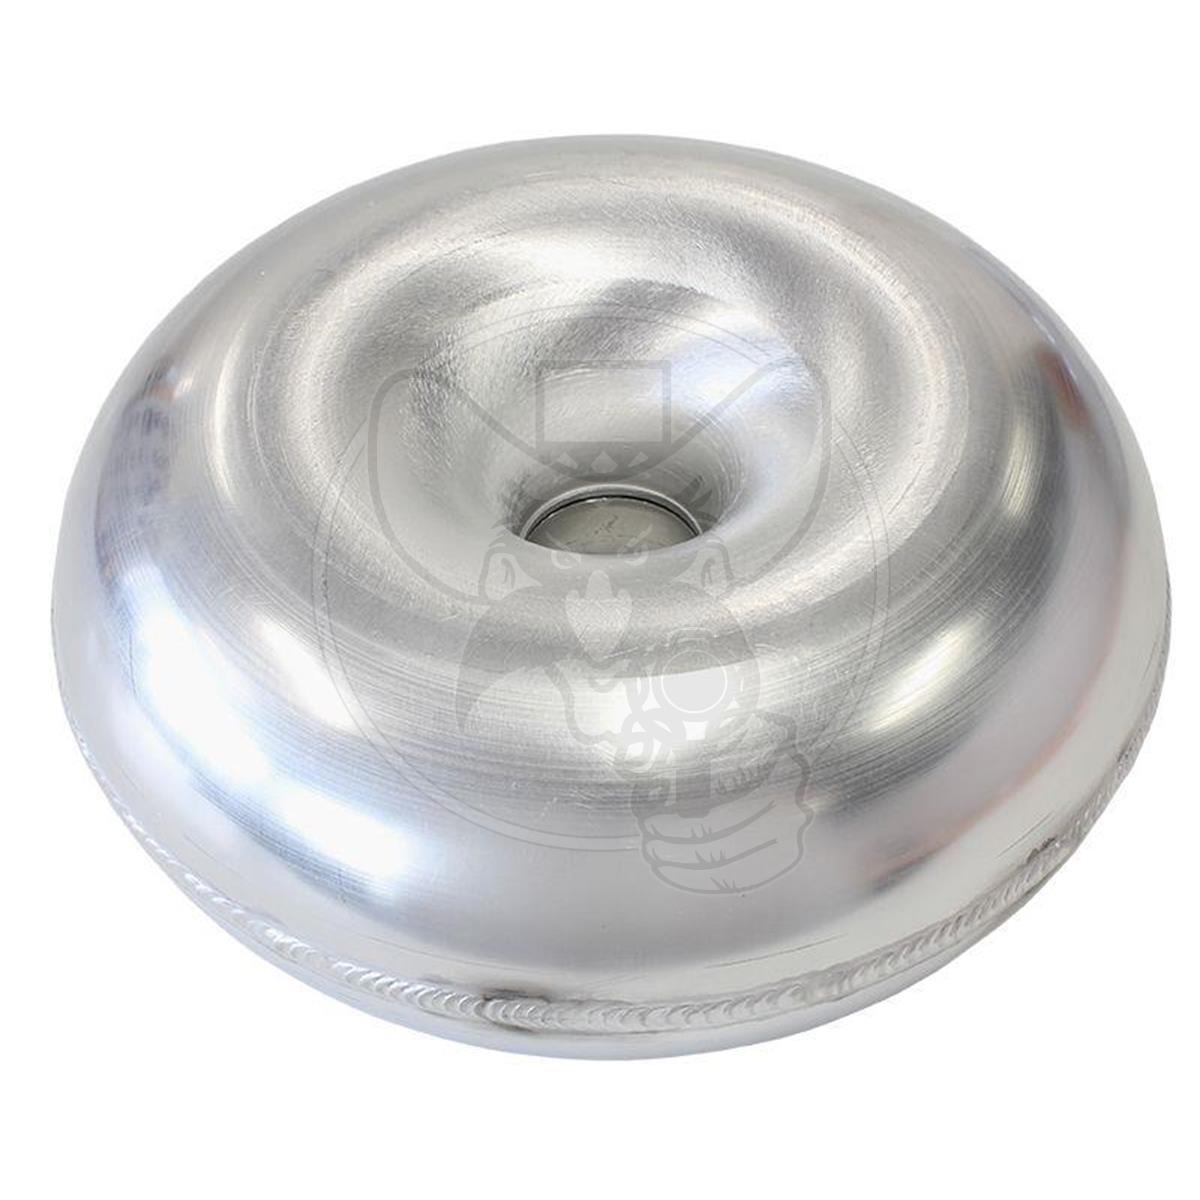 AEROFLOW ALUMINIUM DONUT 3" WELDED TOGETHER OUTSIDE WELD ONLY